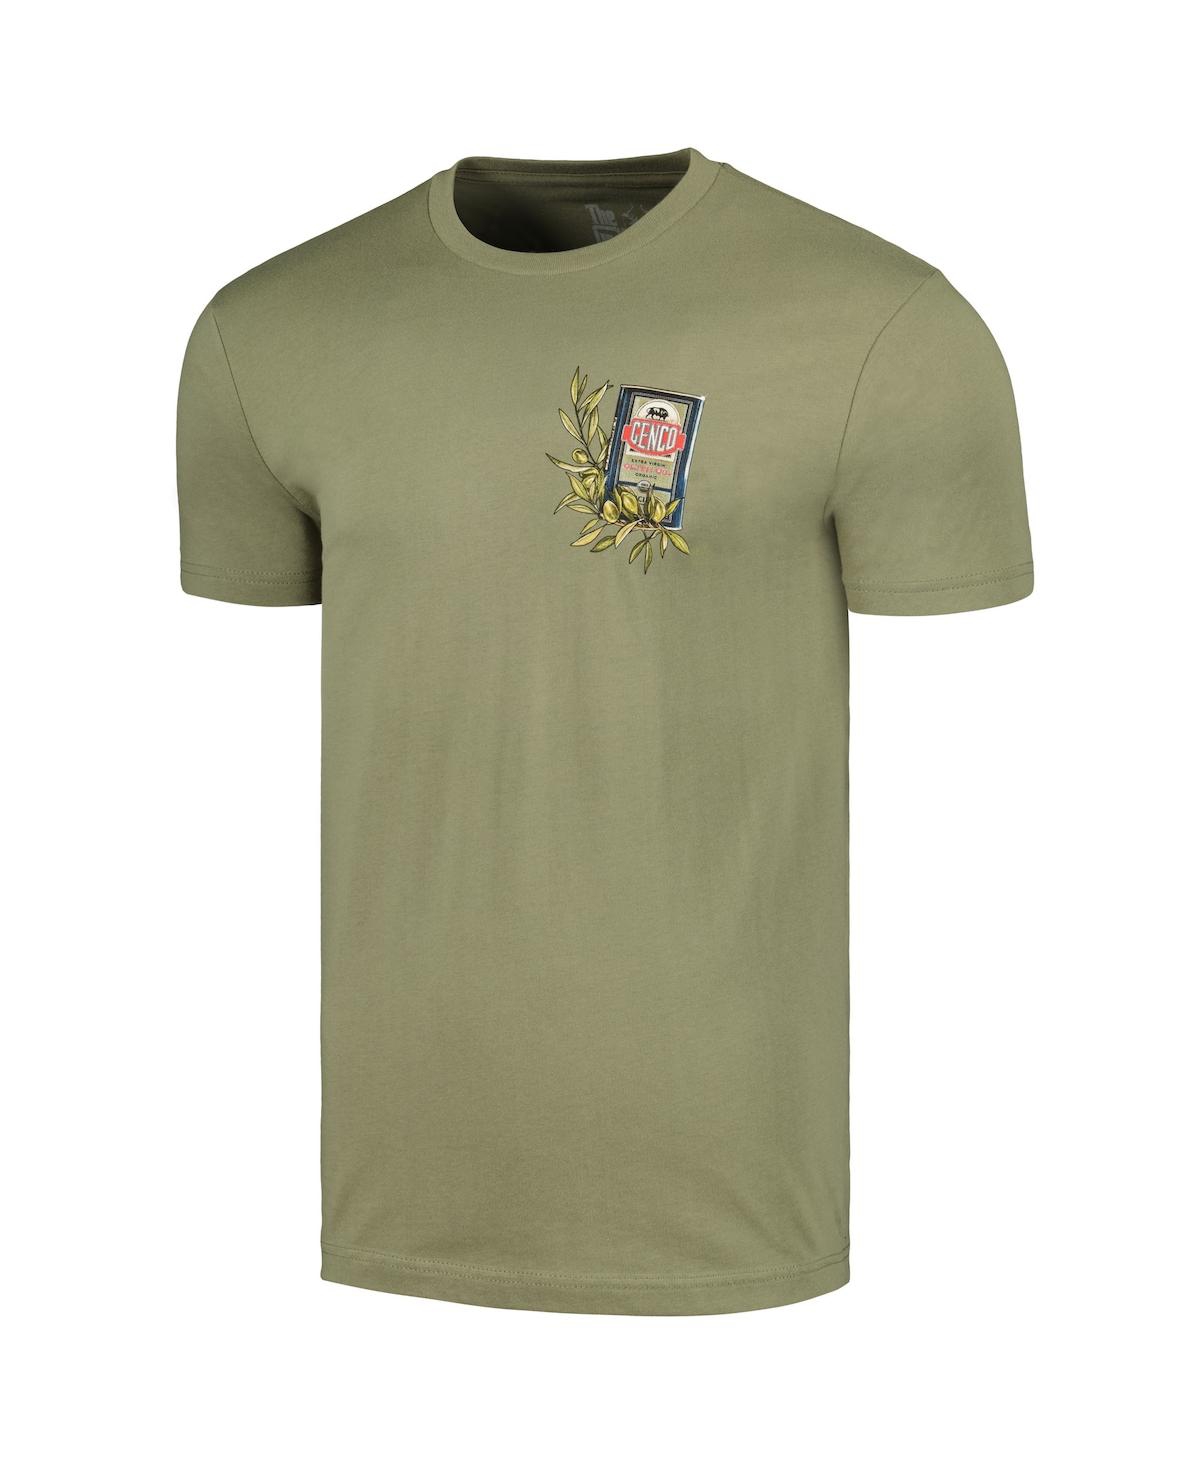 Shop Contenders Clothing Men's  Olive The Godfather Genco Pura Olive Oil T-shirt